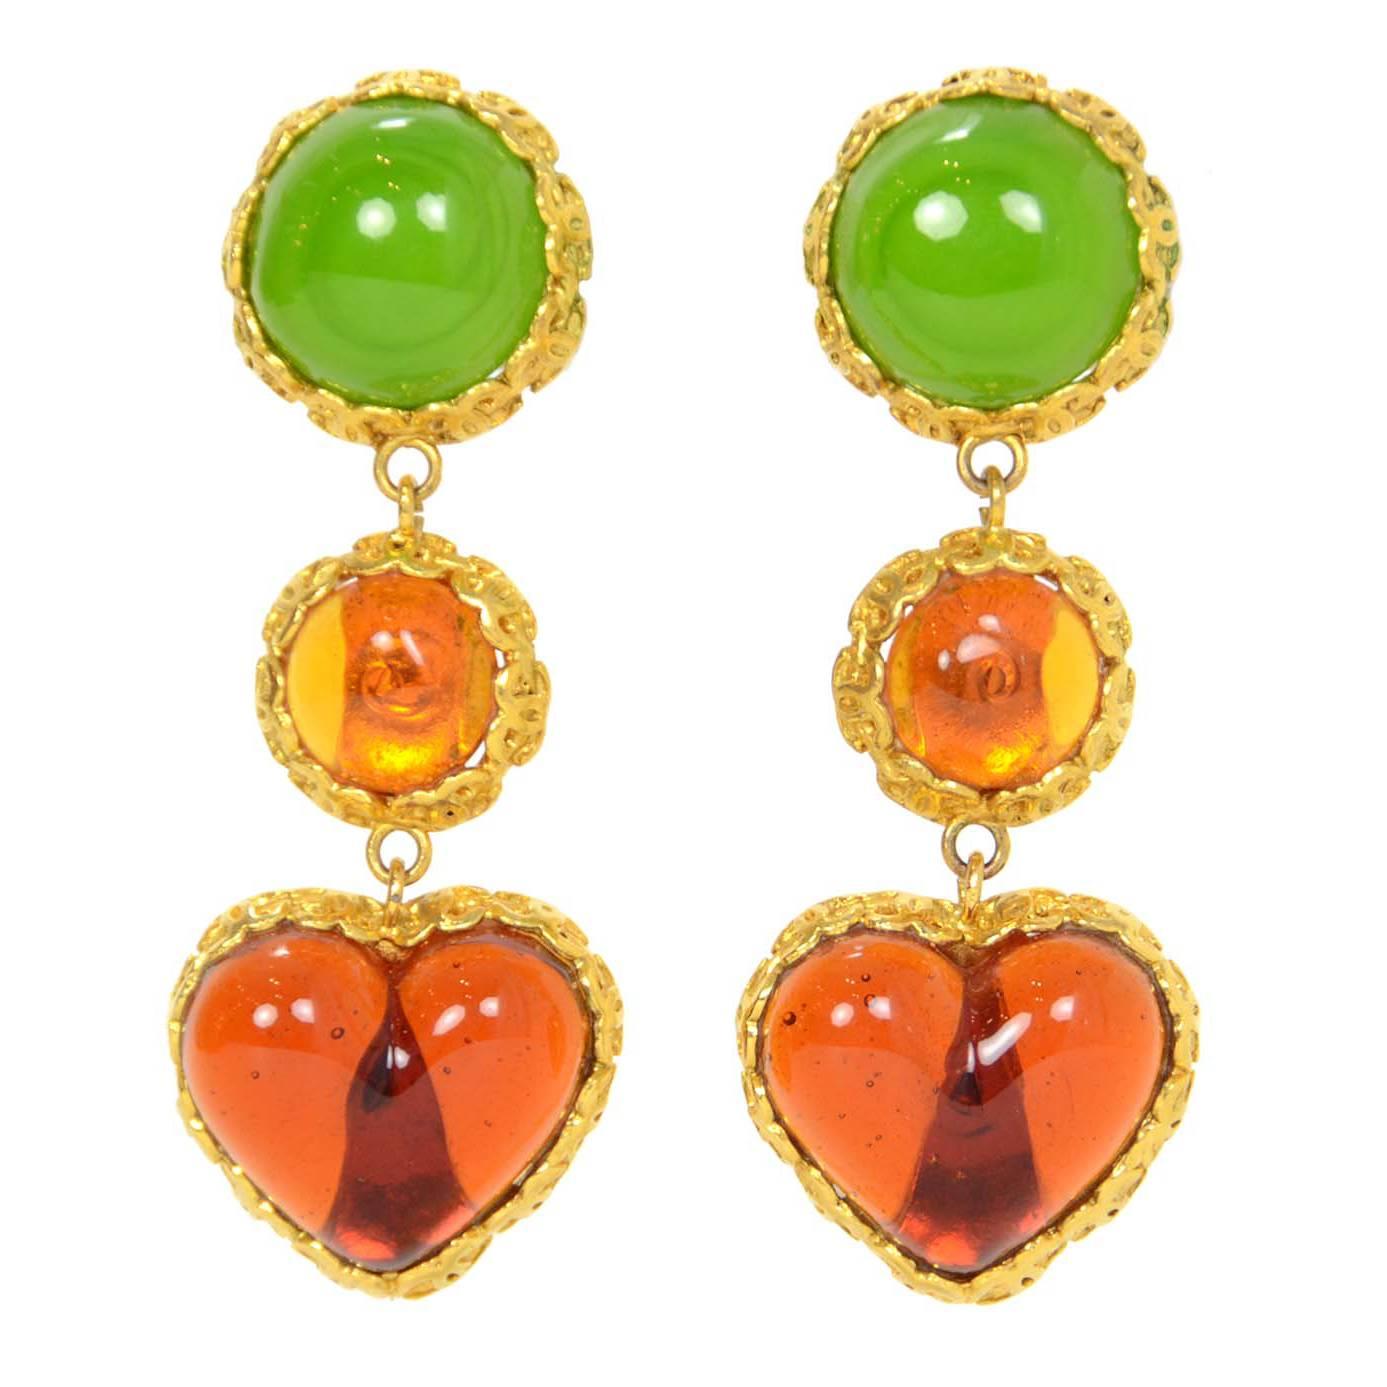 Chanel Vintage 1988 Green & Amber Gripoix Clip On Earrings 